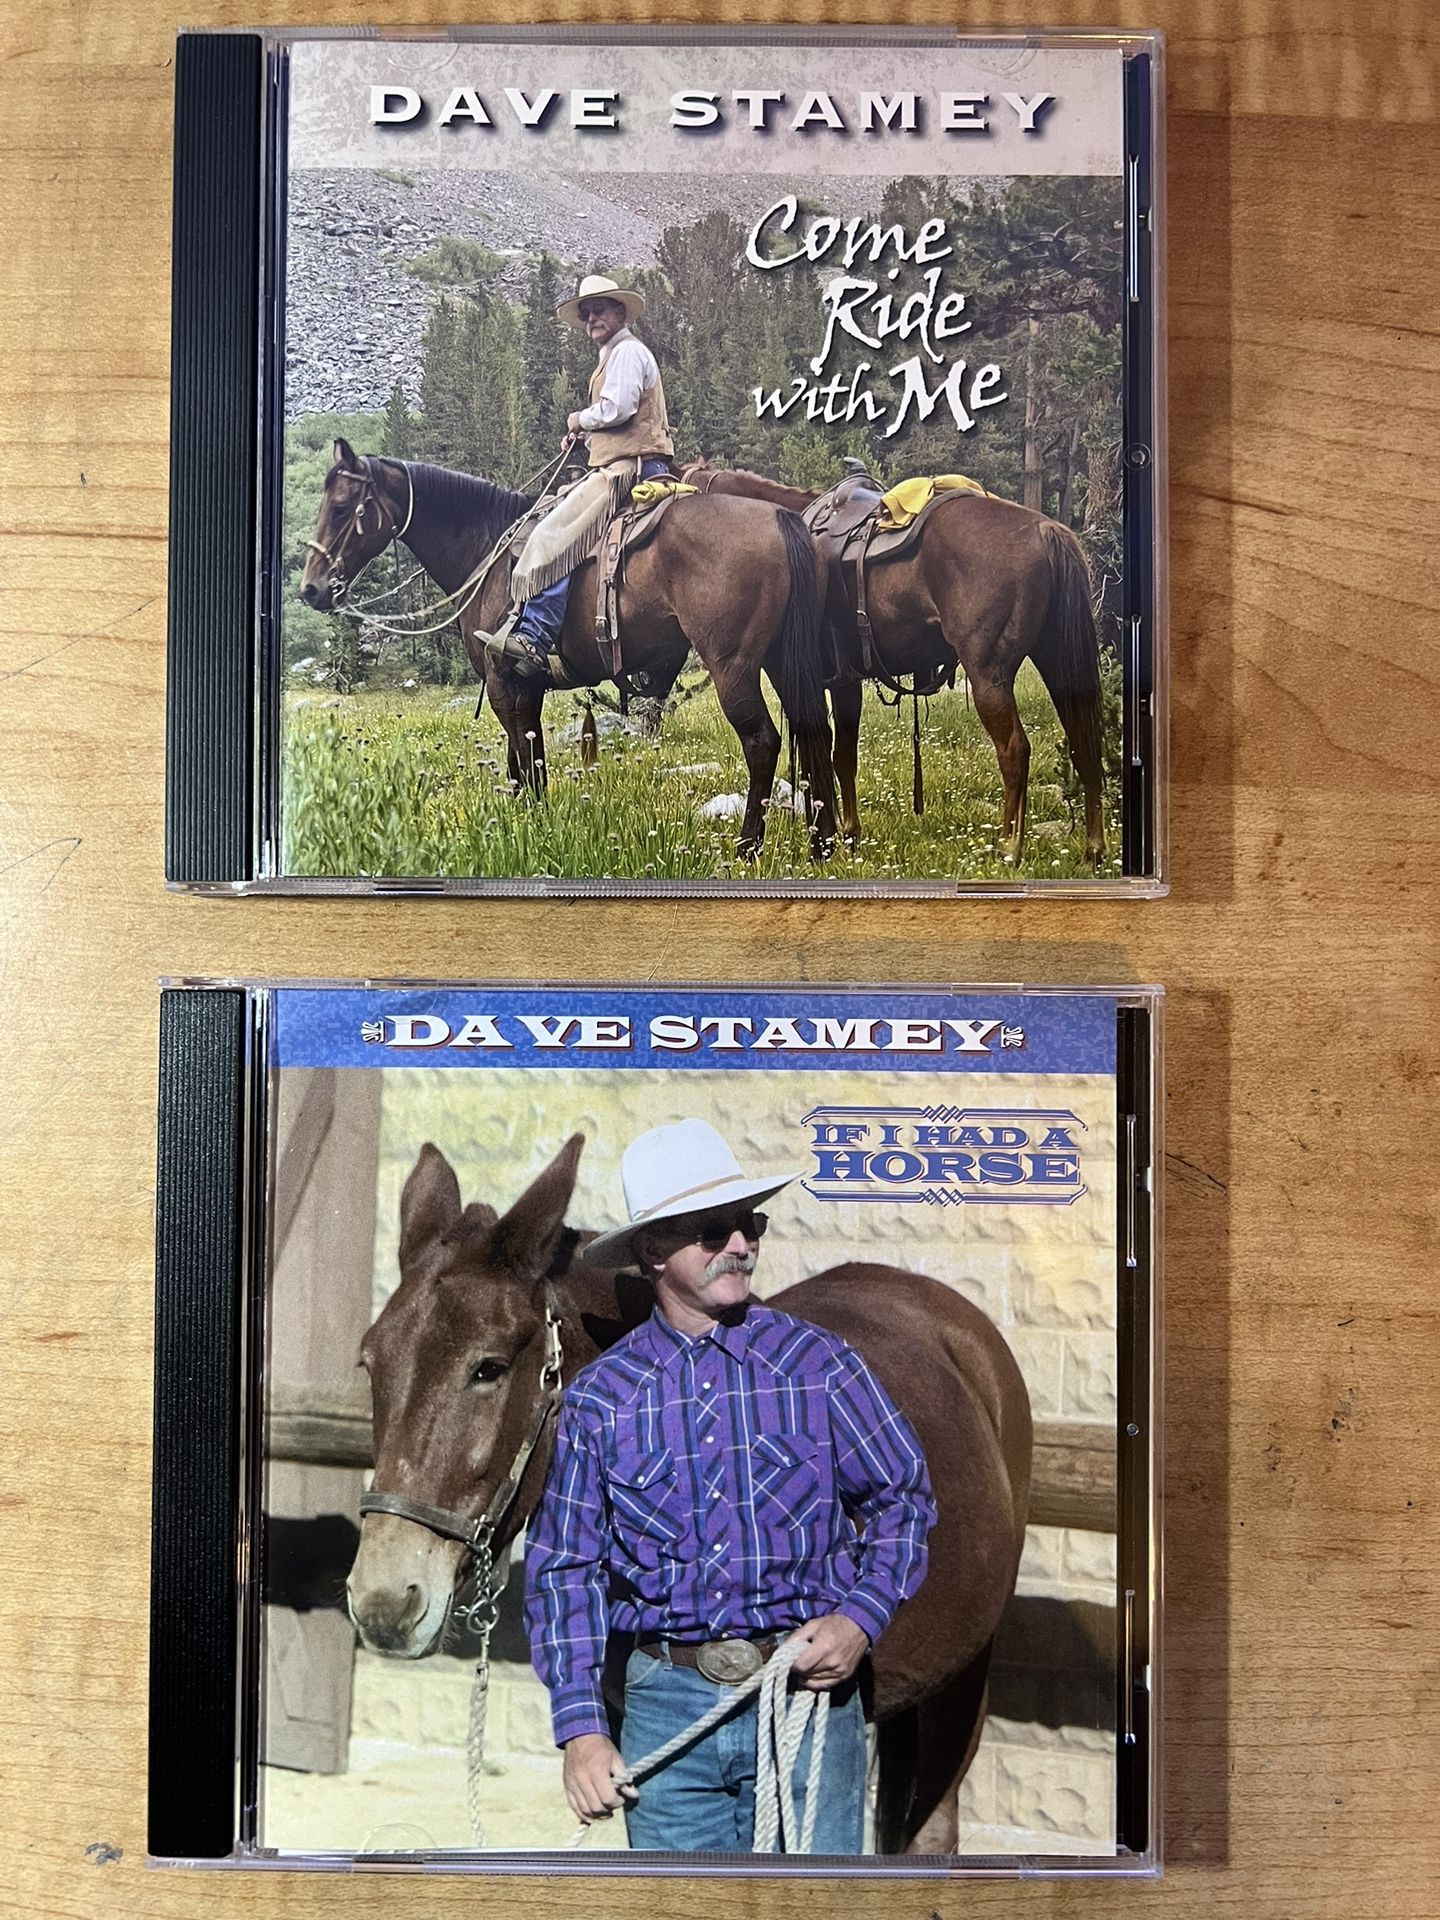 2 DAVE STAMEY CD - Come Ride With Me & If I Had A Horse - Very Good